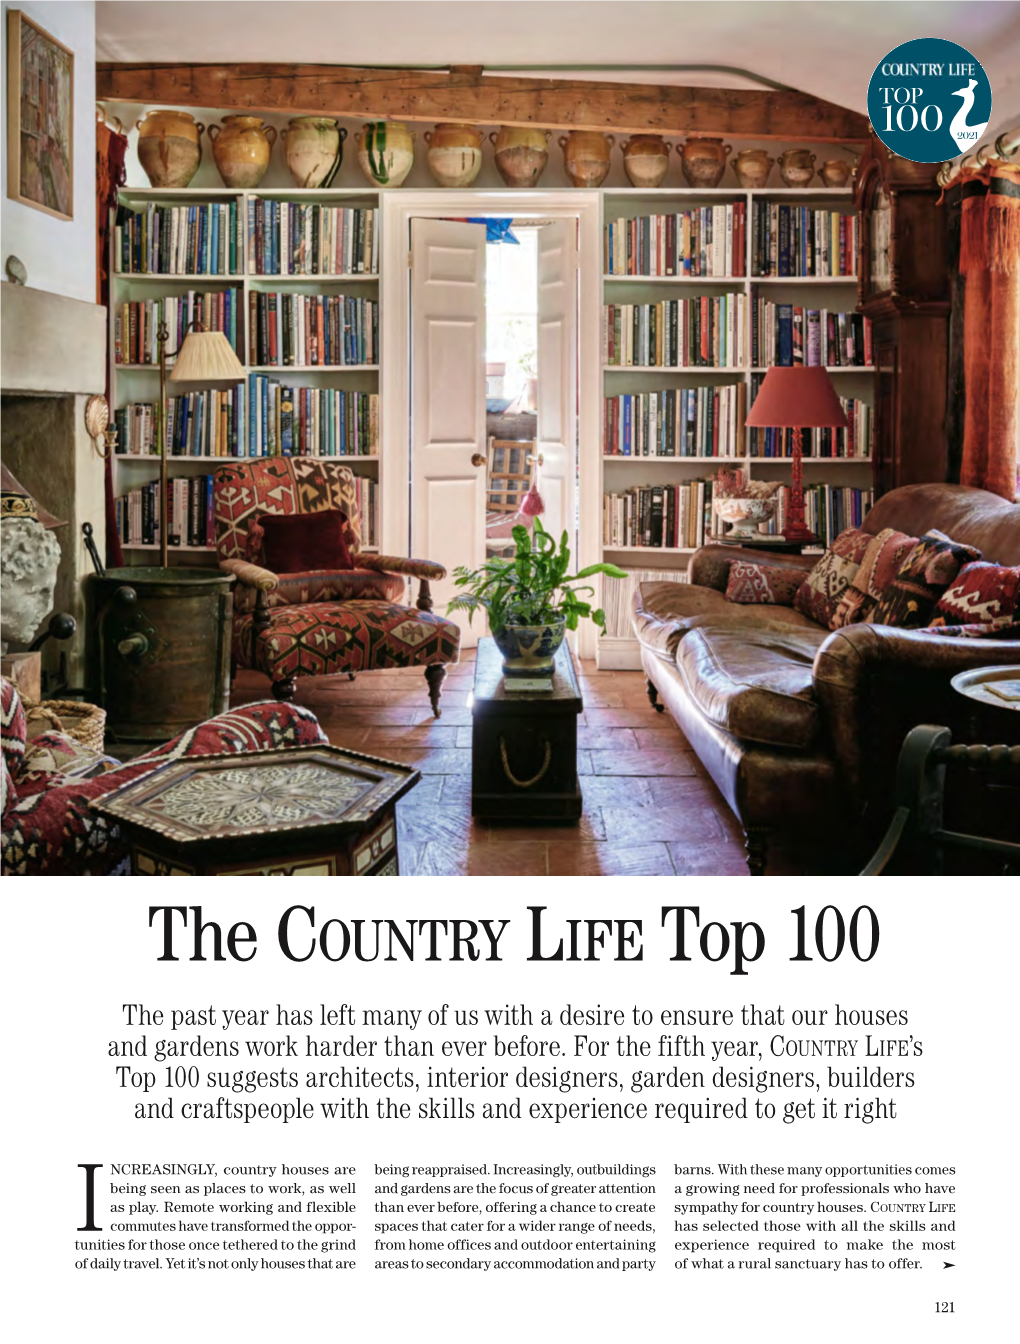 The Country Life Top 100 the Past Year Has Left Many of Us with a Desire to Ensure That Our Houses and Gardens Work Harder Than Ever Before